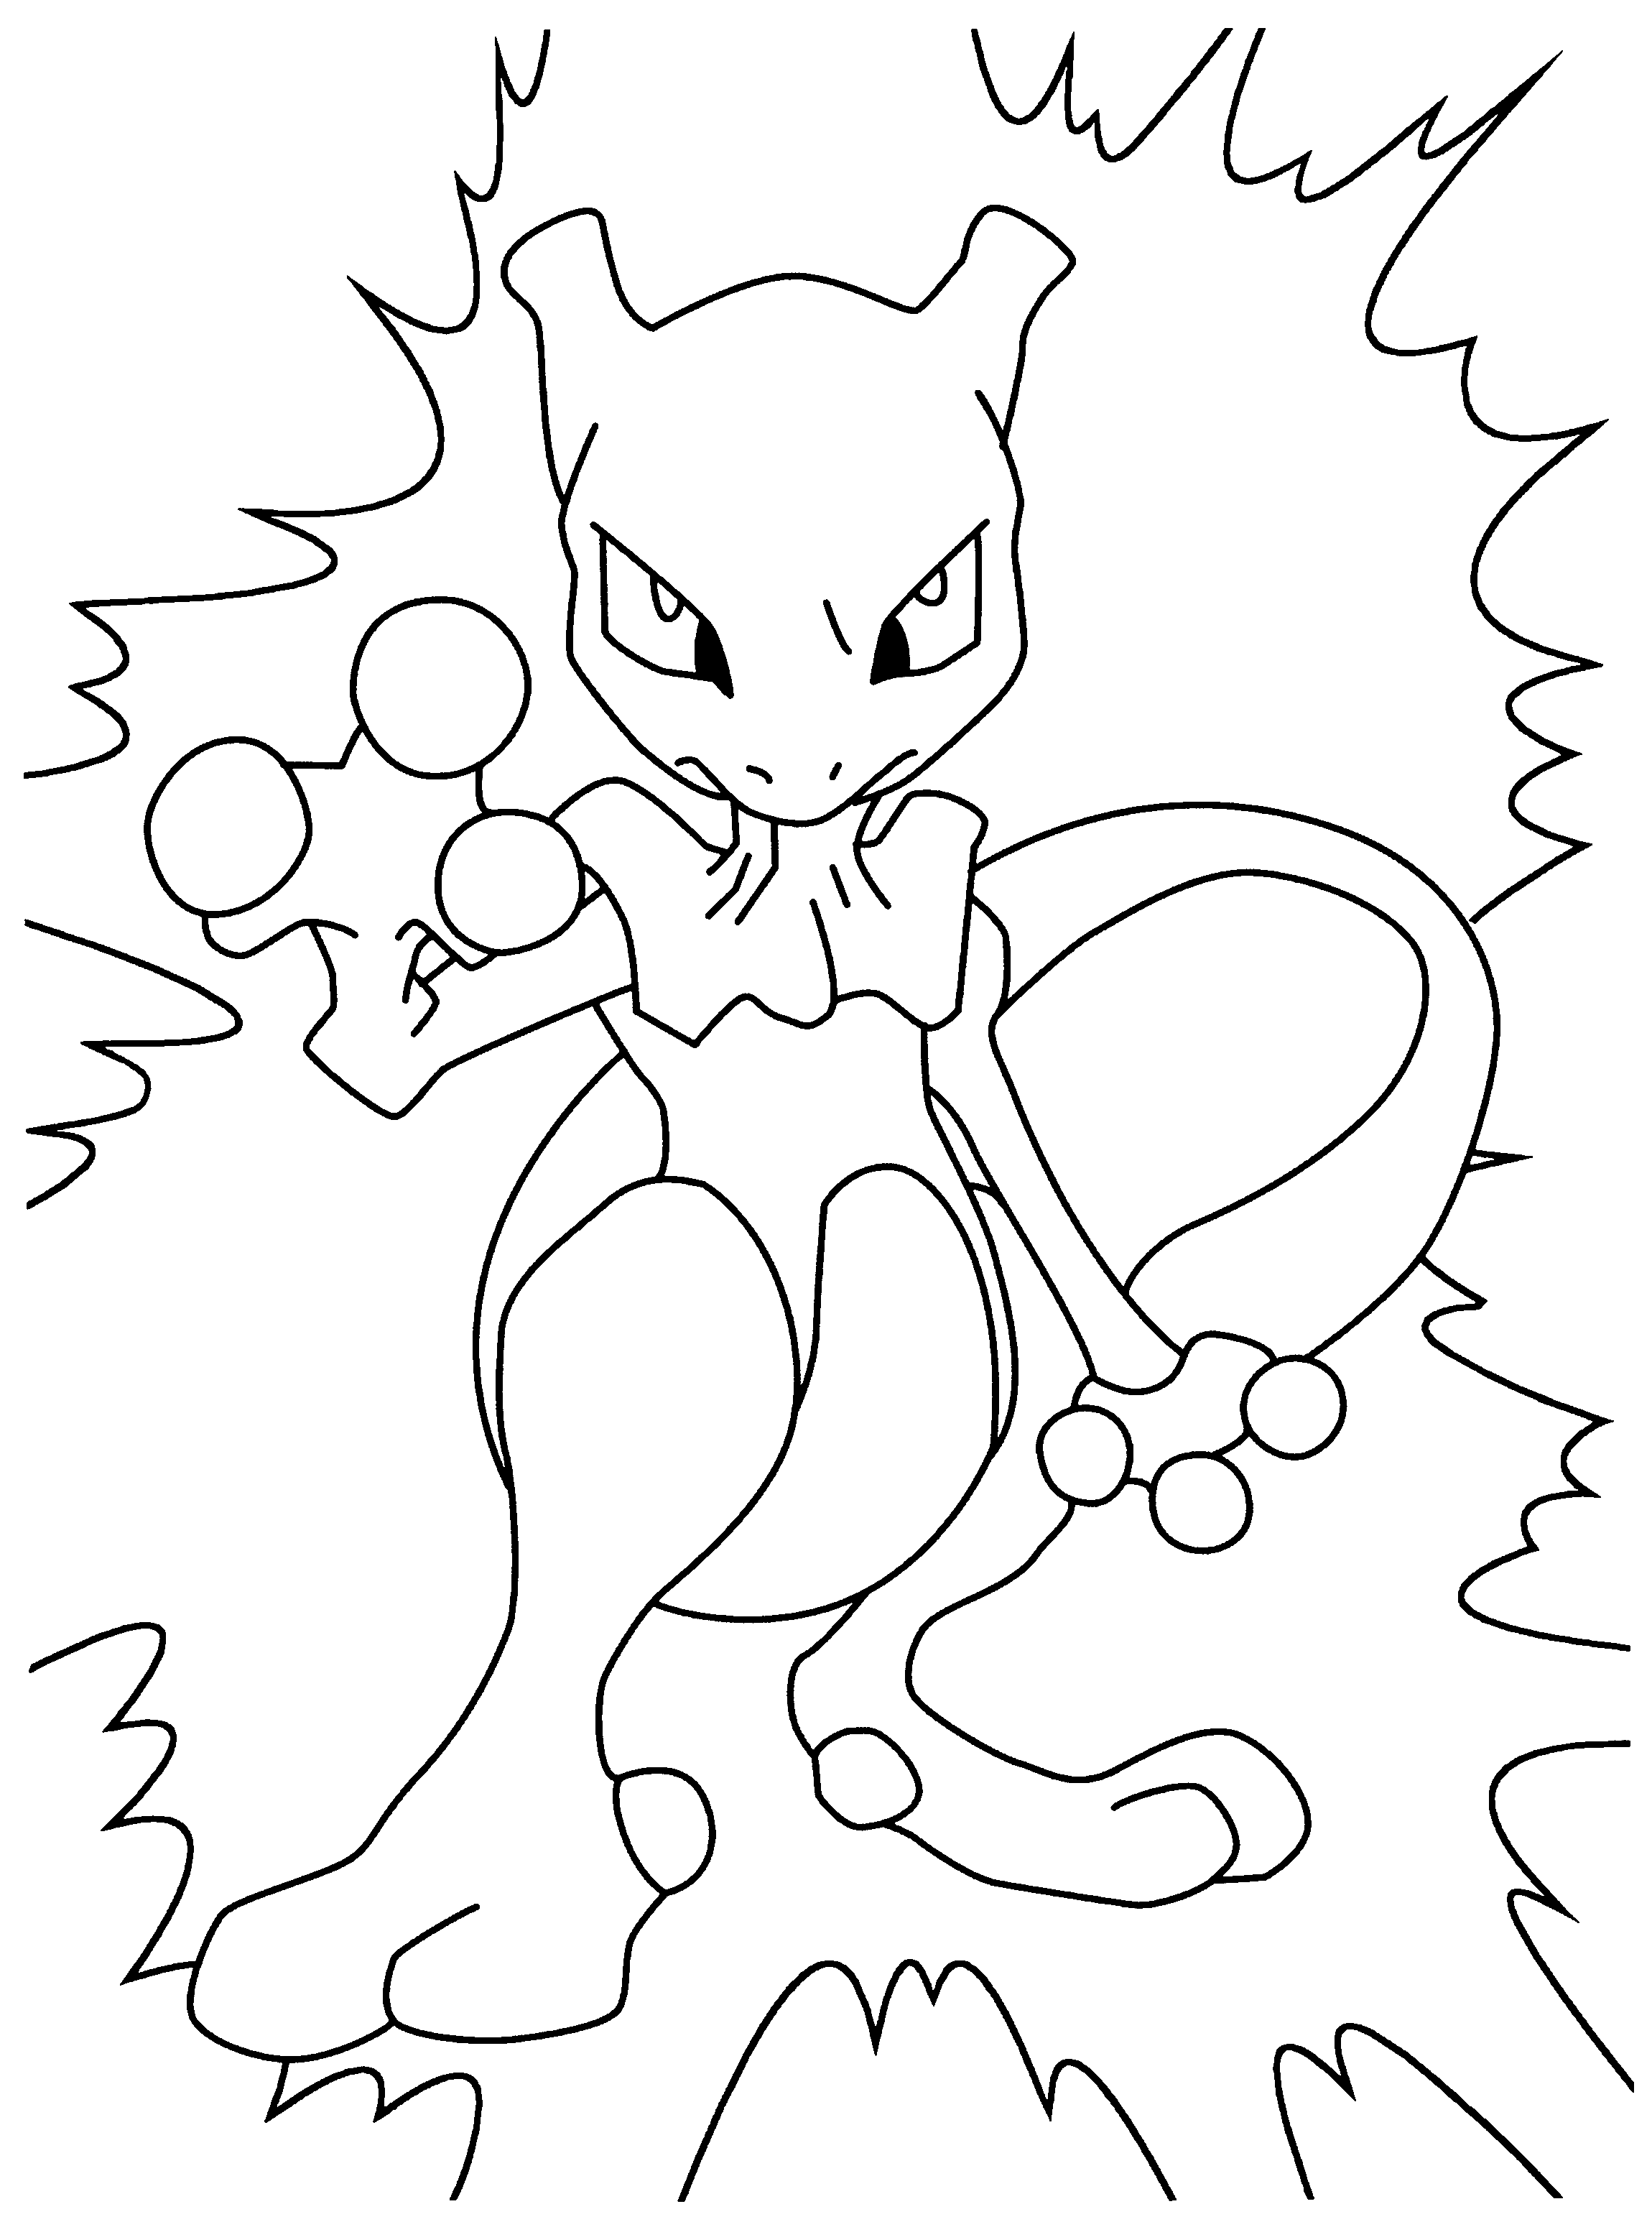 coloring pages for pokemon pokemon coloring pages join your favorite pokemon on an pages pokemon coloring for 